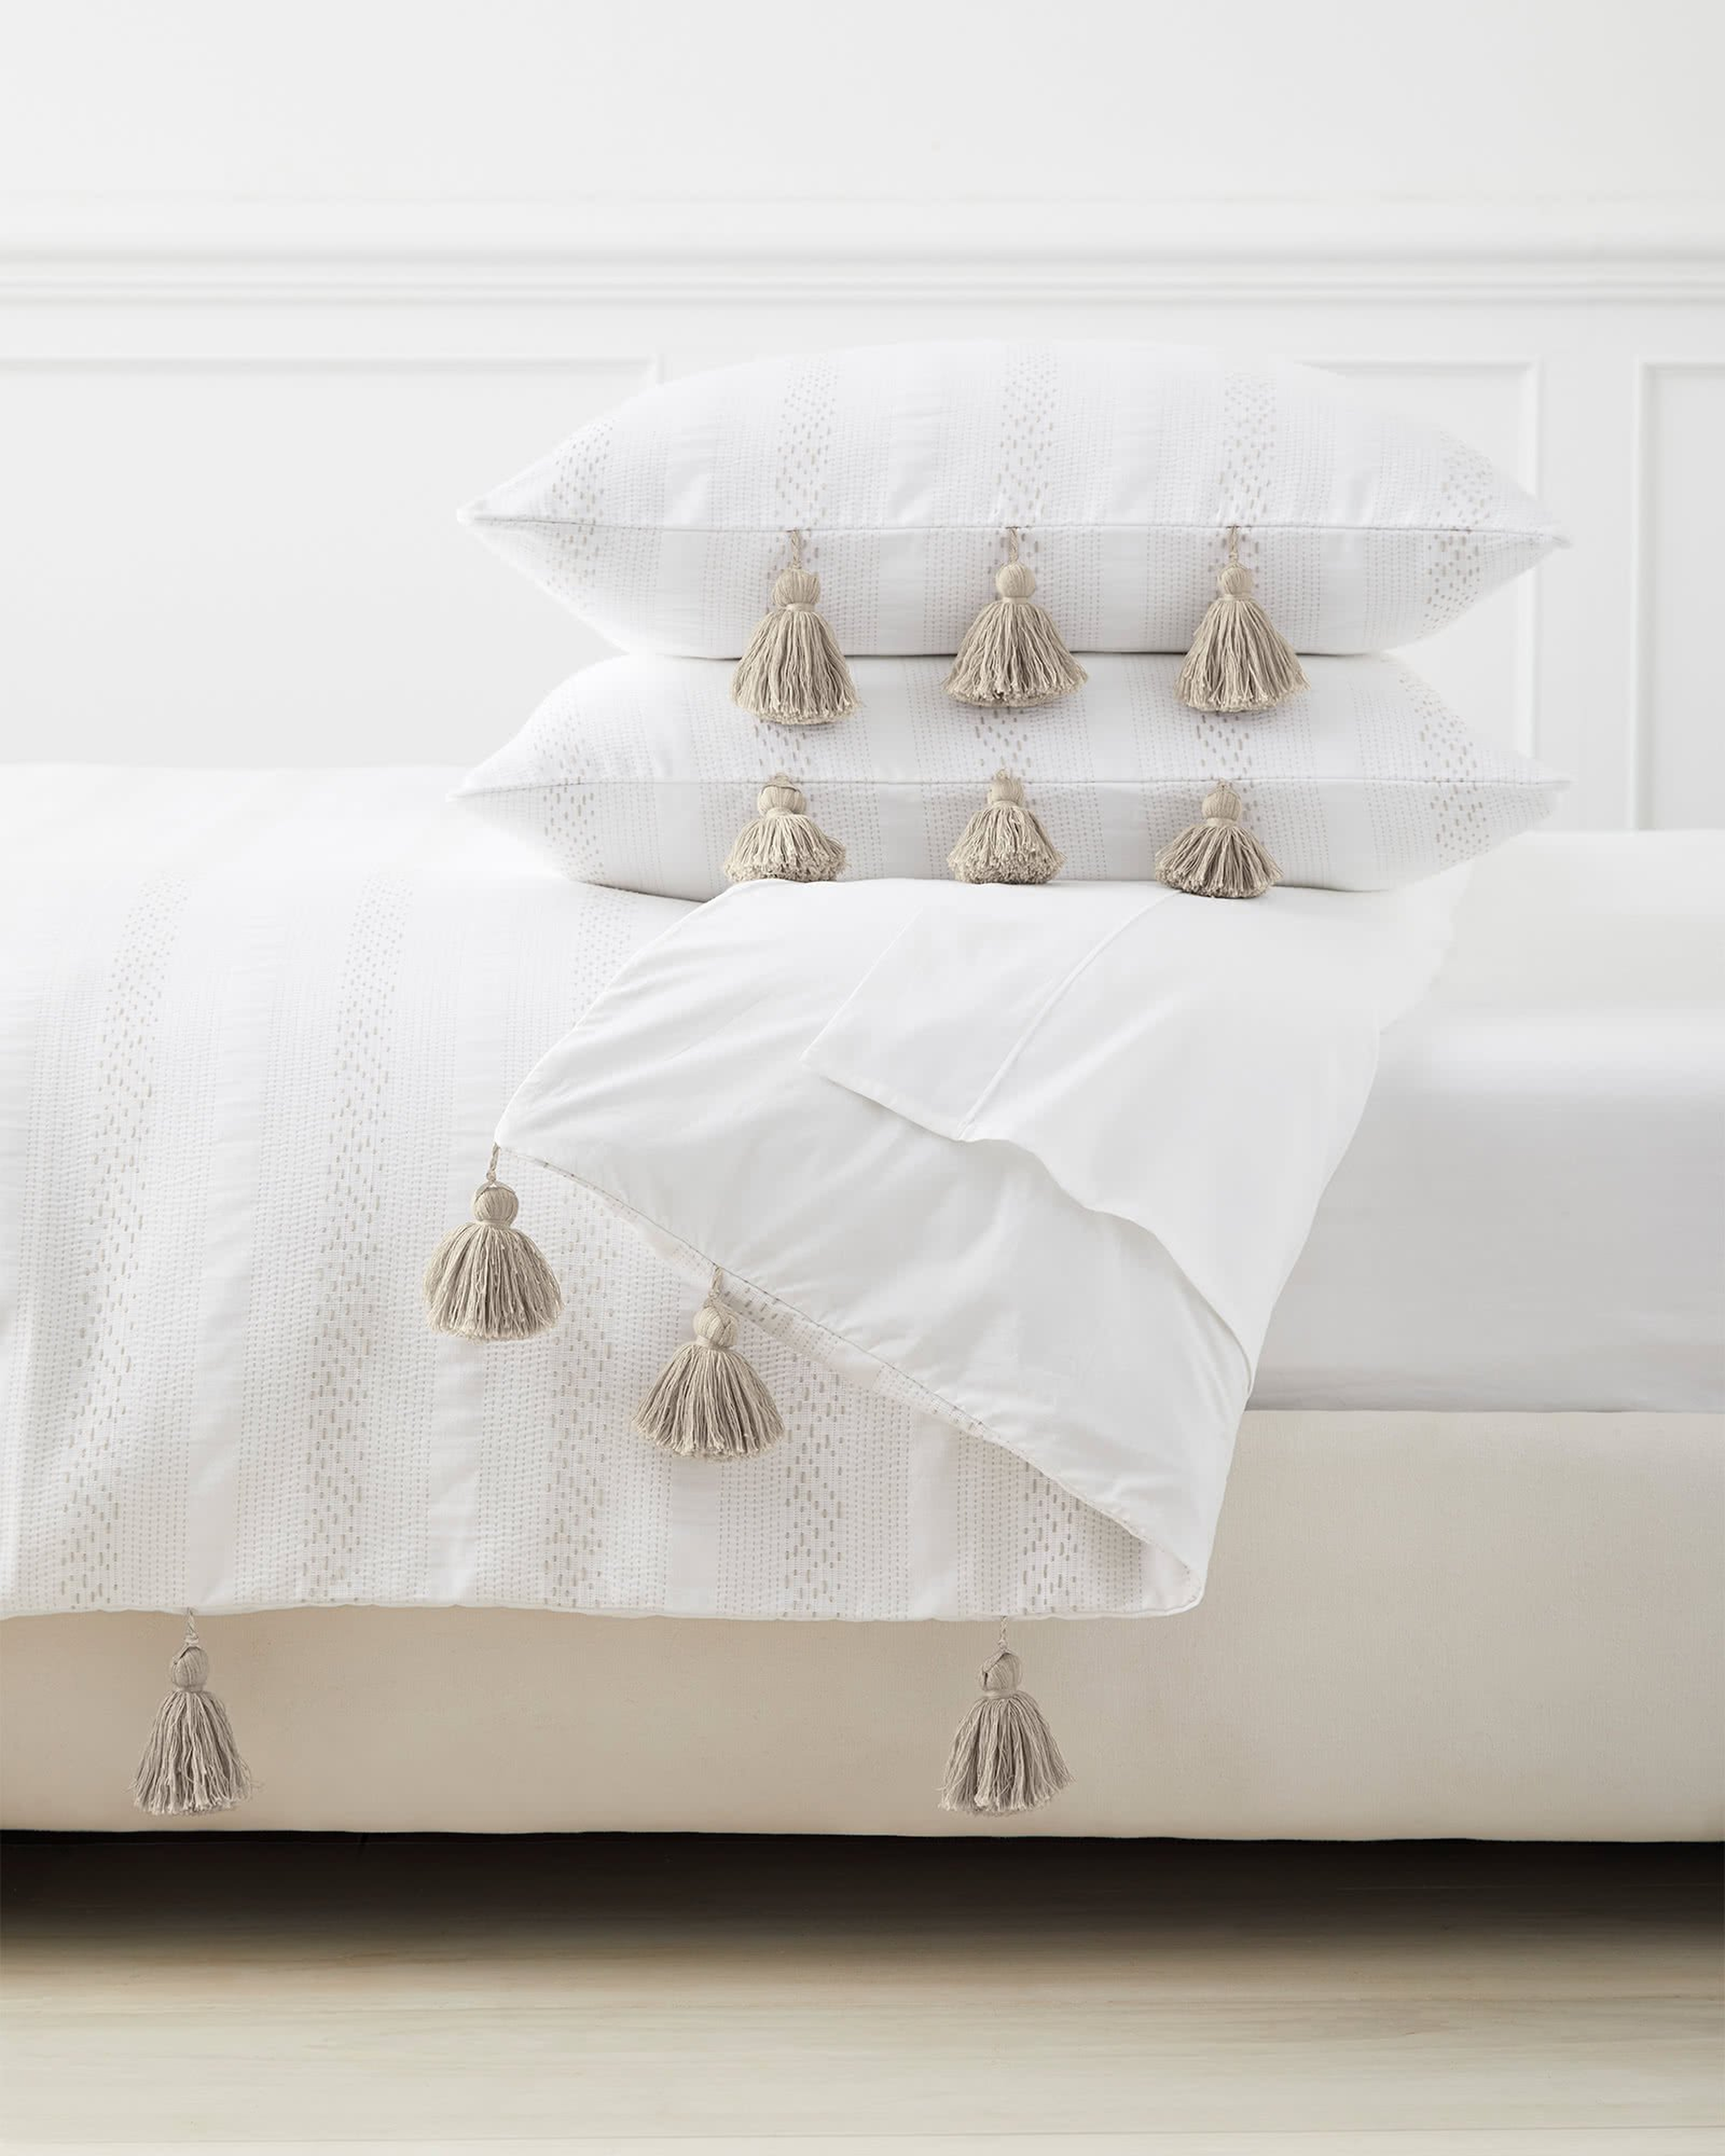 Sea Ranch Duvet Cover - Serena and Lily